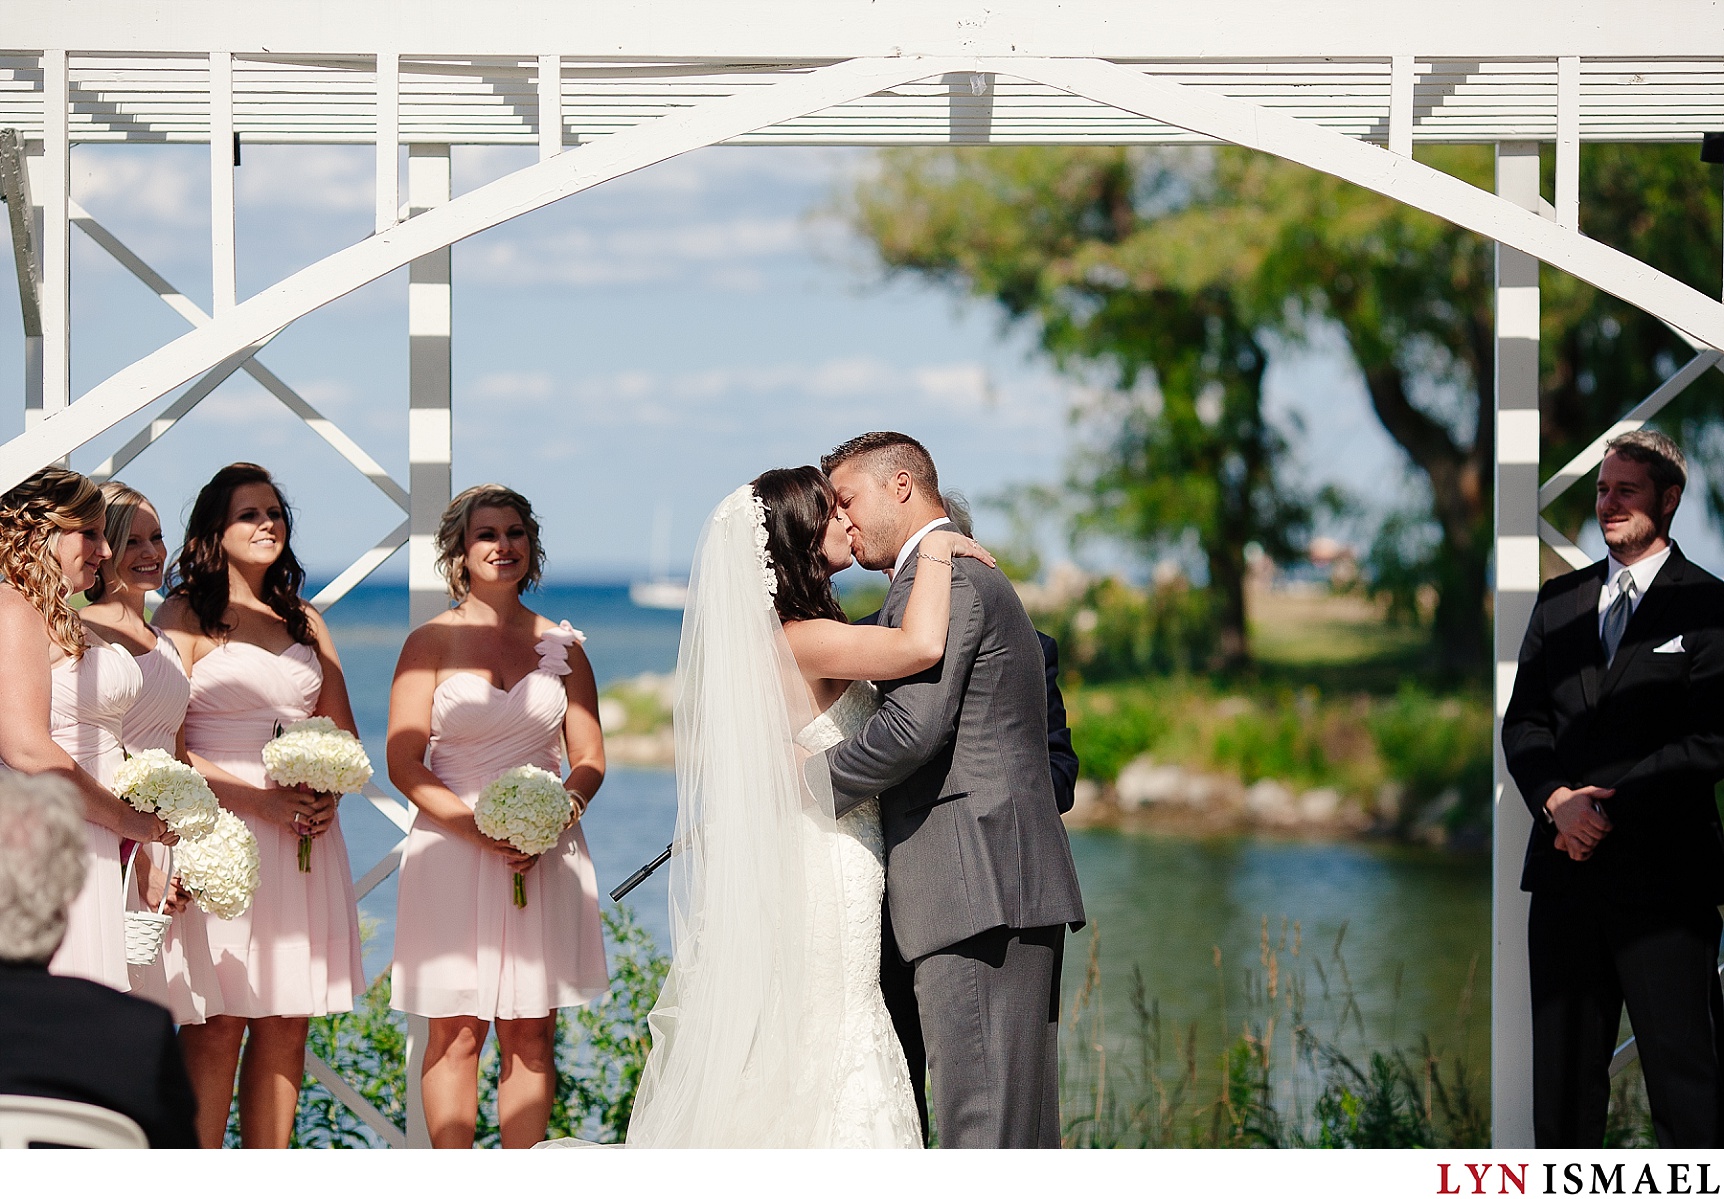 First kiss of the bride and groom at the Cranberry Resort in Collingwood.